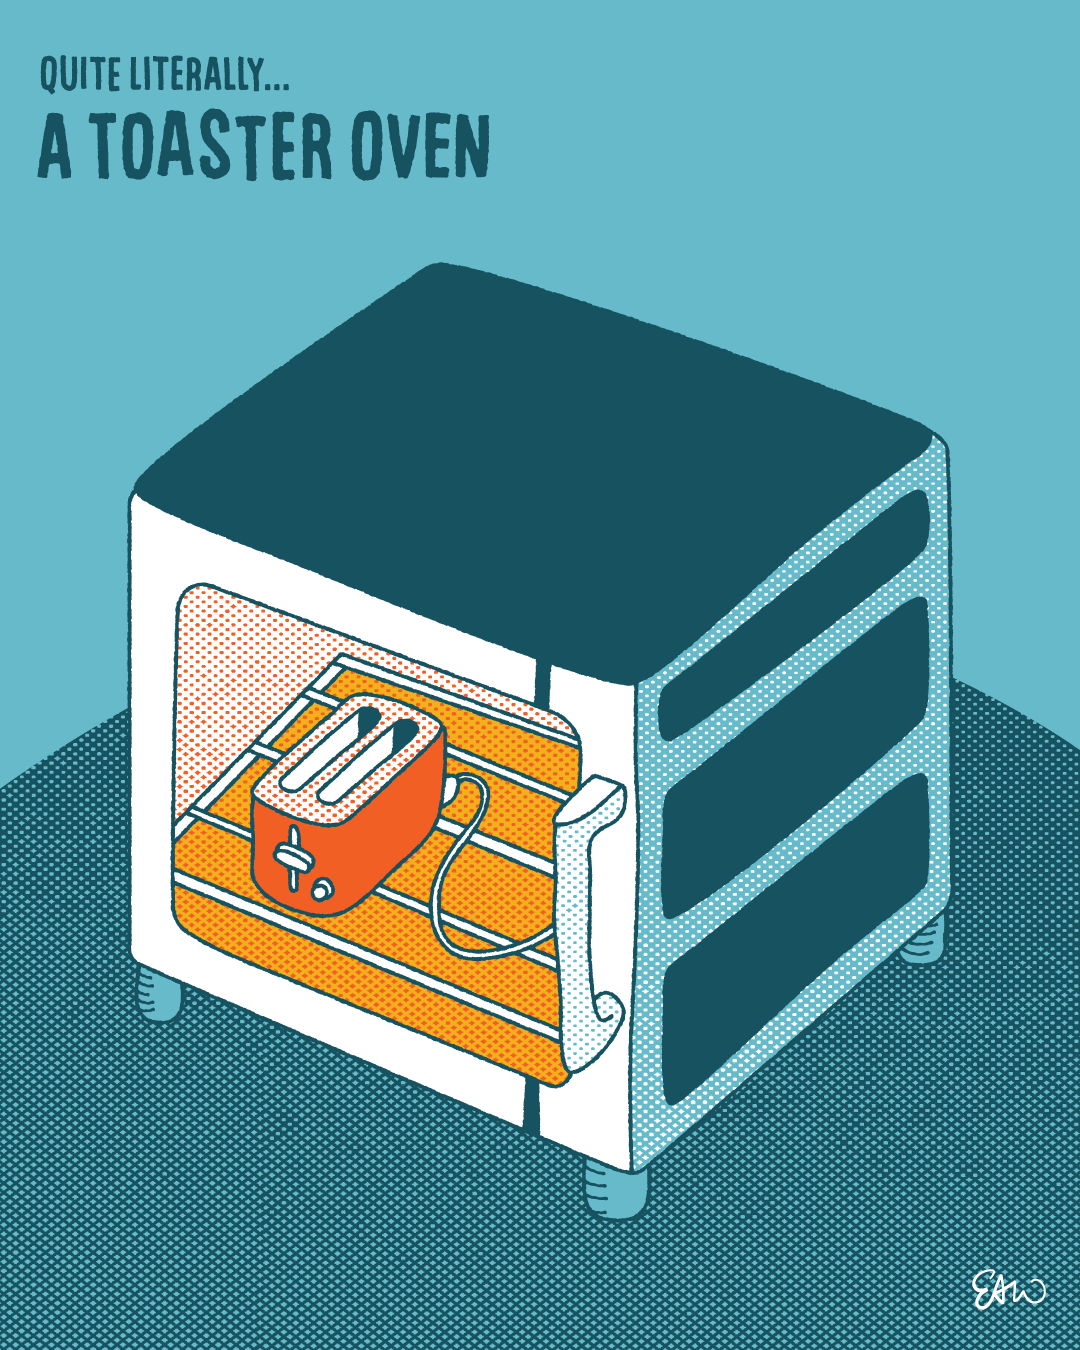 Single panel comic drawn in a retro style with vintage tones of teal, orange, and yellow. At the centre of the composition is an illustration of an oven, and inside the oven is a toaster. The caption reads, "Quite literally... a toaster oven."